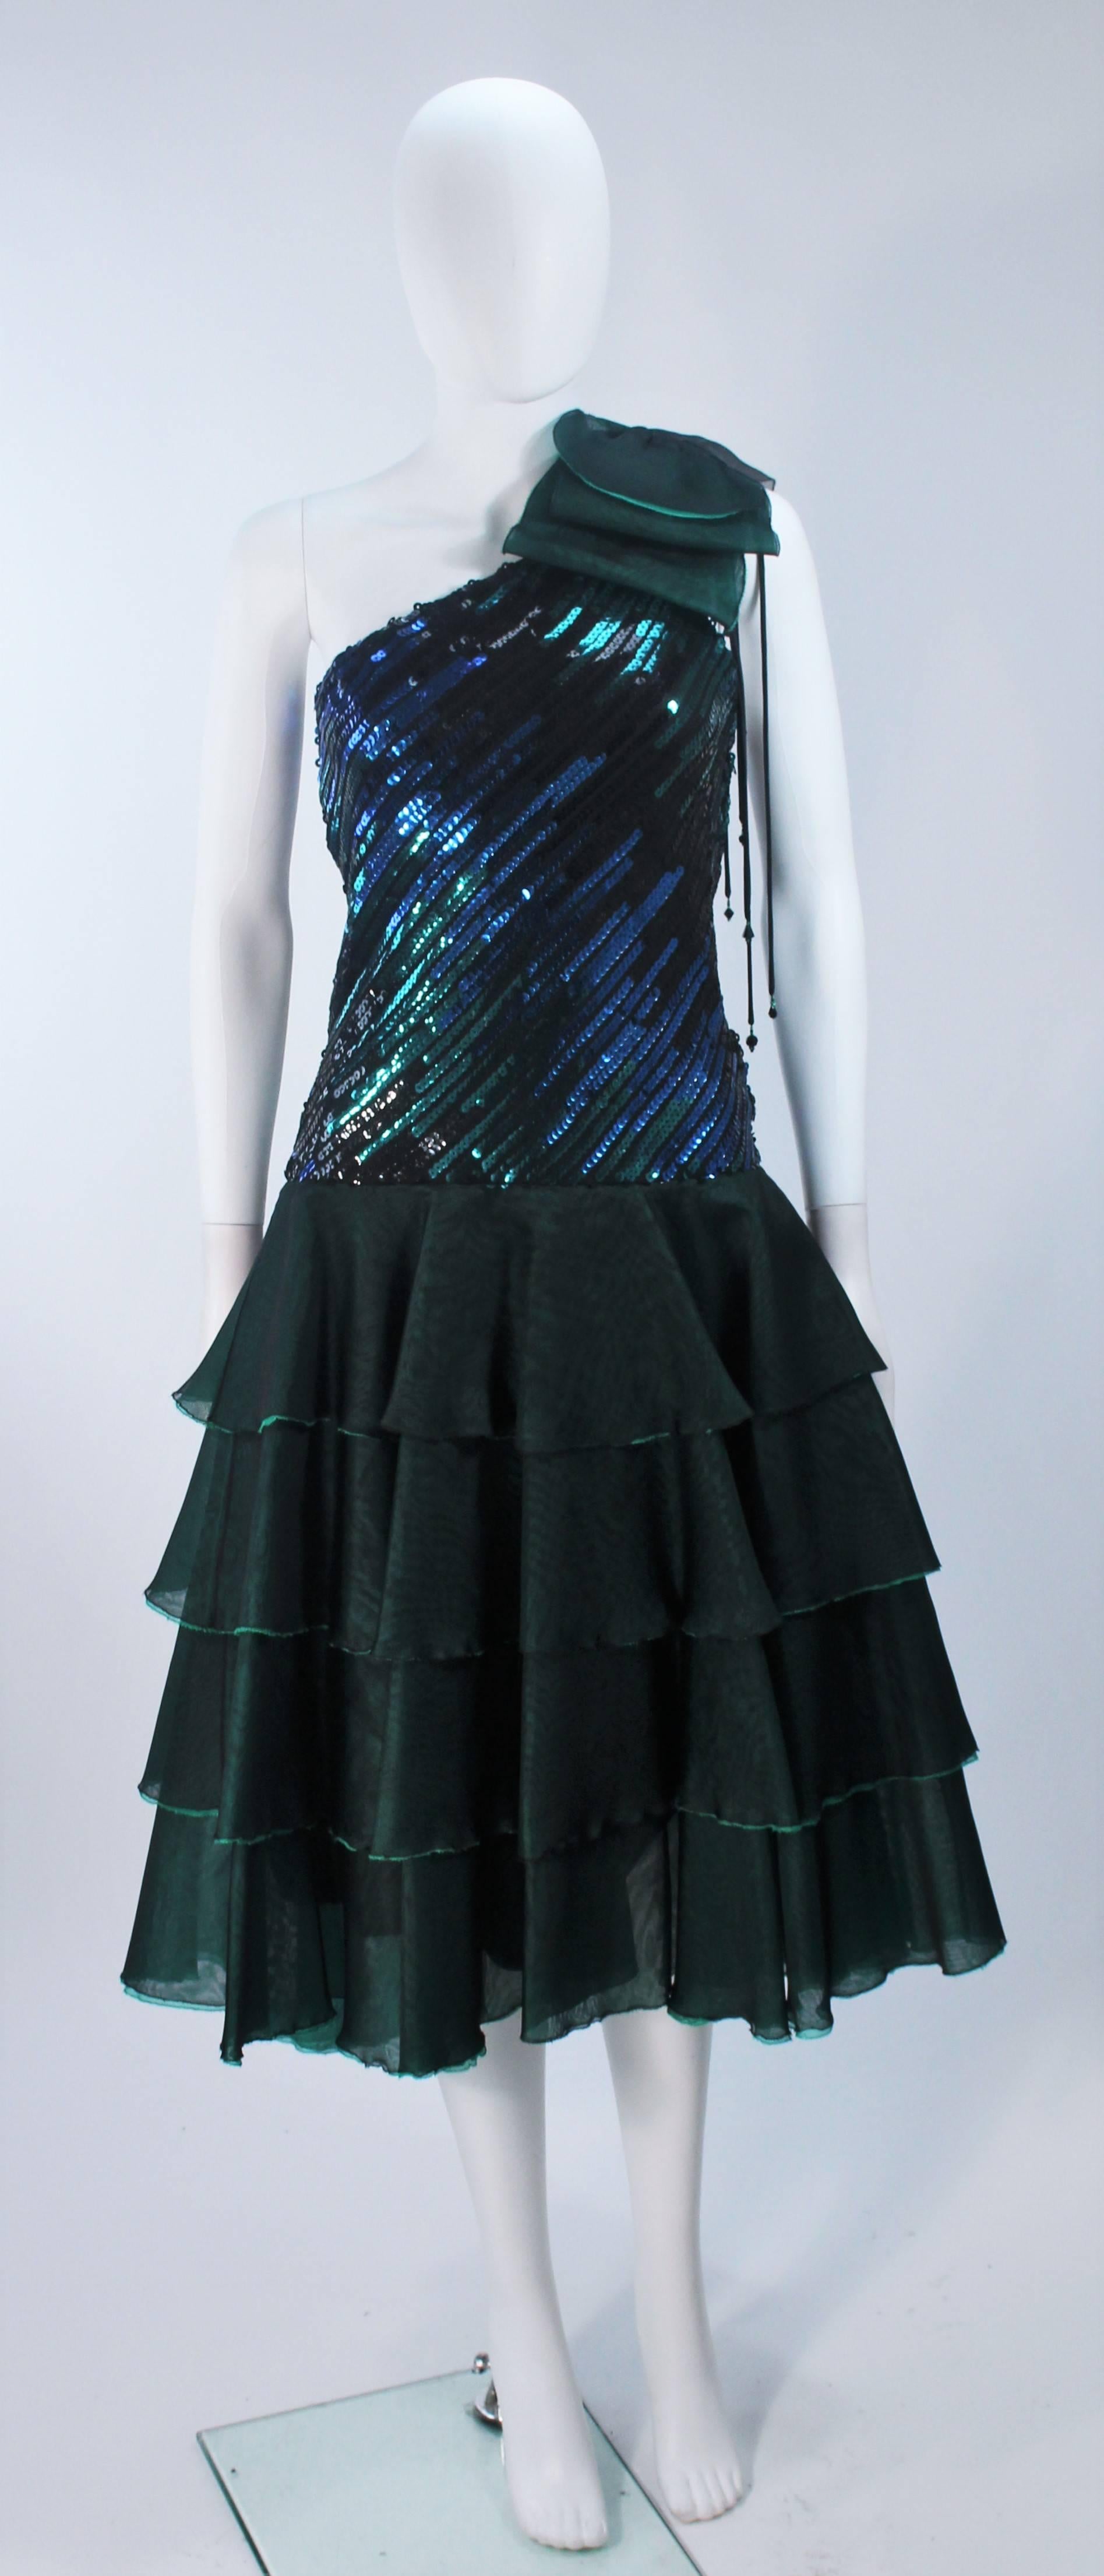  This dress is composed of a fine iridescent/multi-dimensional hue emerald green and teal silk with a sequin embellished bodice. Features an asymmetrical design with a side zipper. In excellent vintage condition. 

  **Please cross-reference